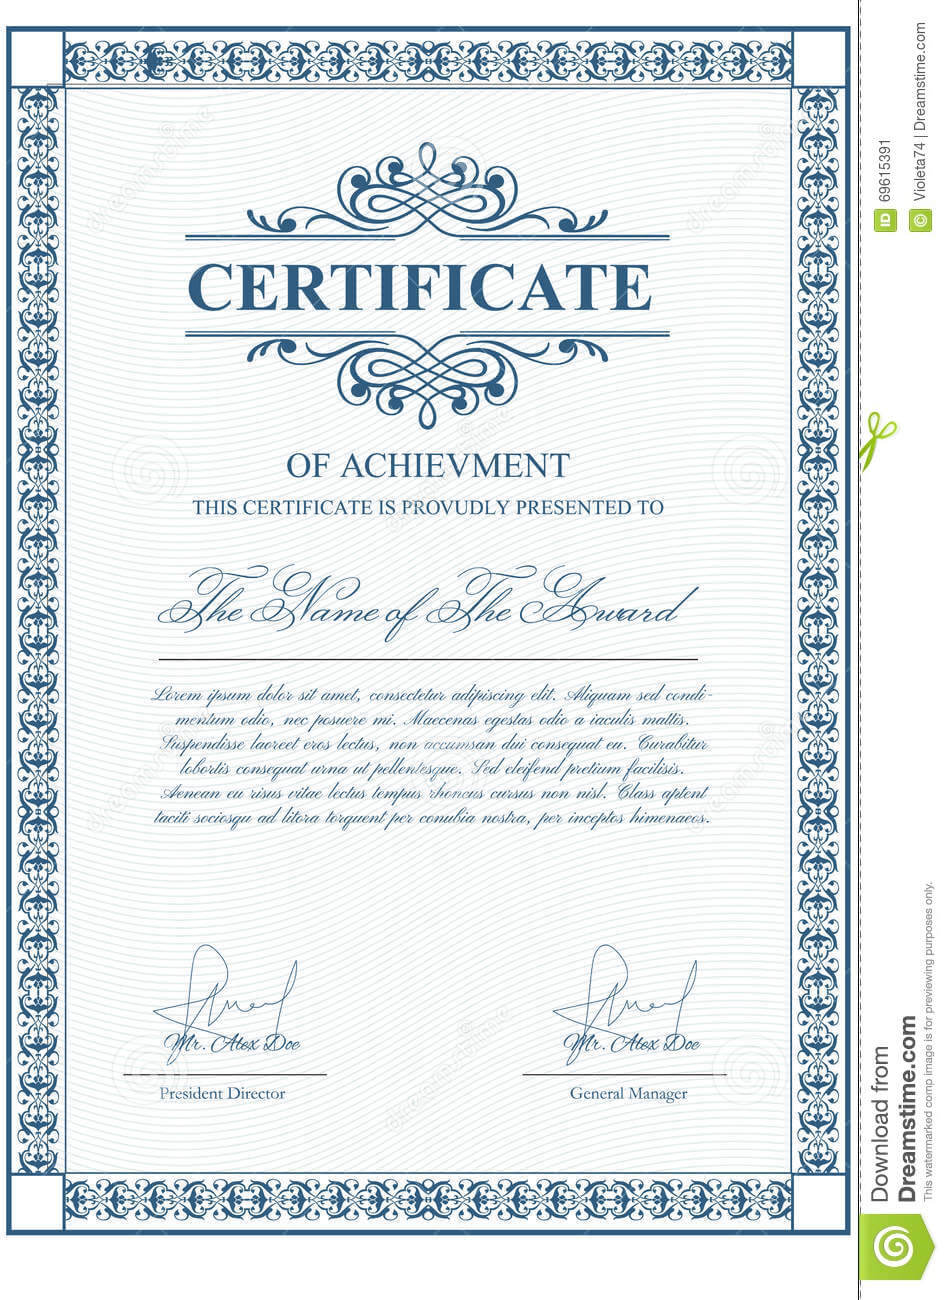 Certificate Template With Guilloche Elements. Stock Vector With Validation Certificate Template